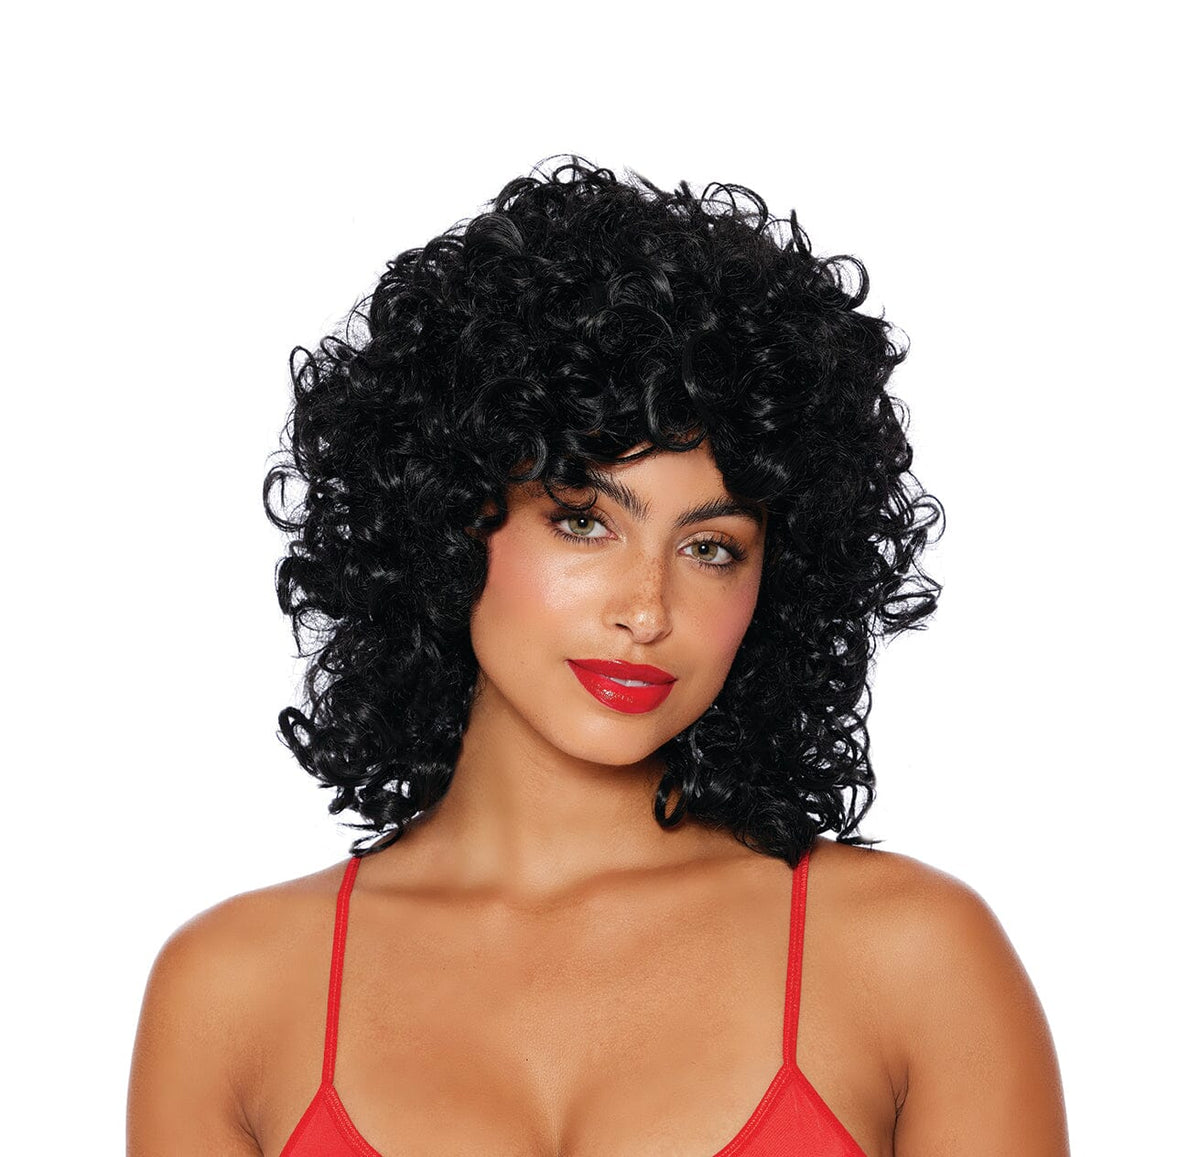 Dreamgirl 70's Curly Wig Costume Accessory Dreamgirl 